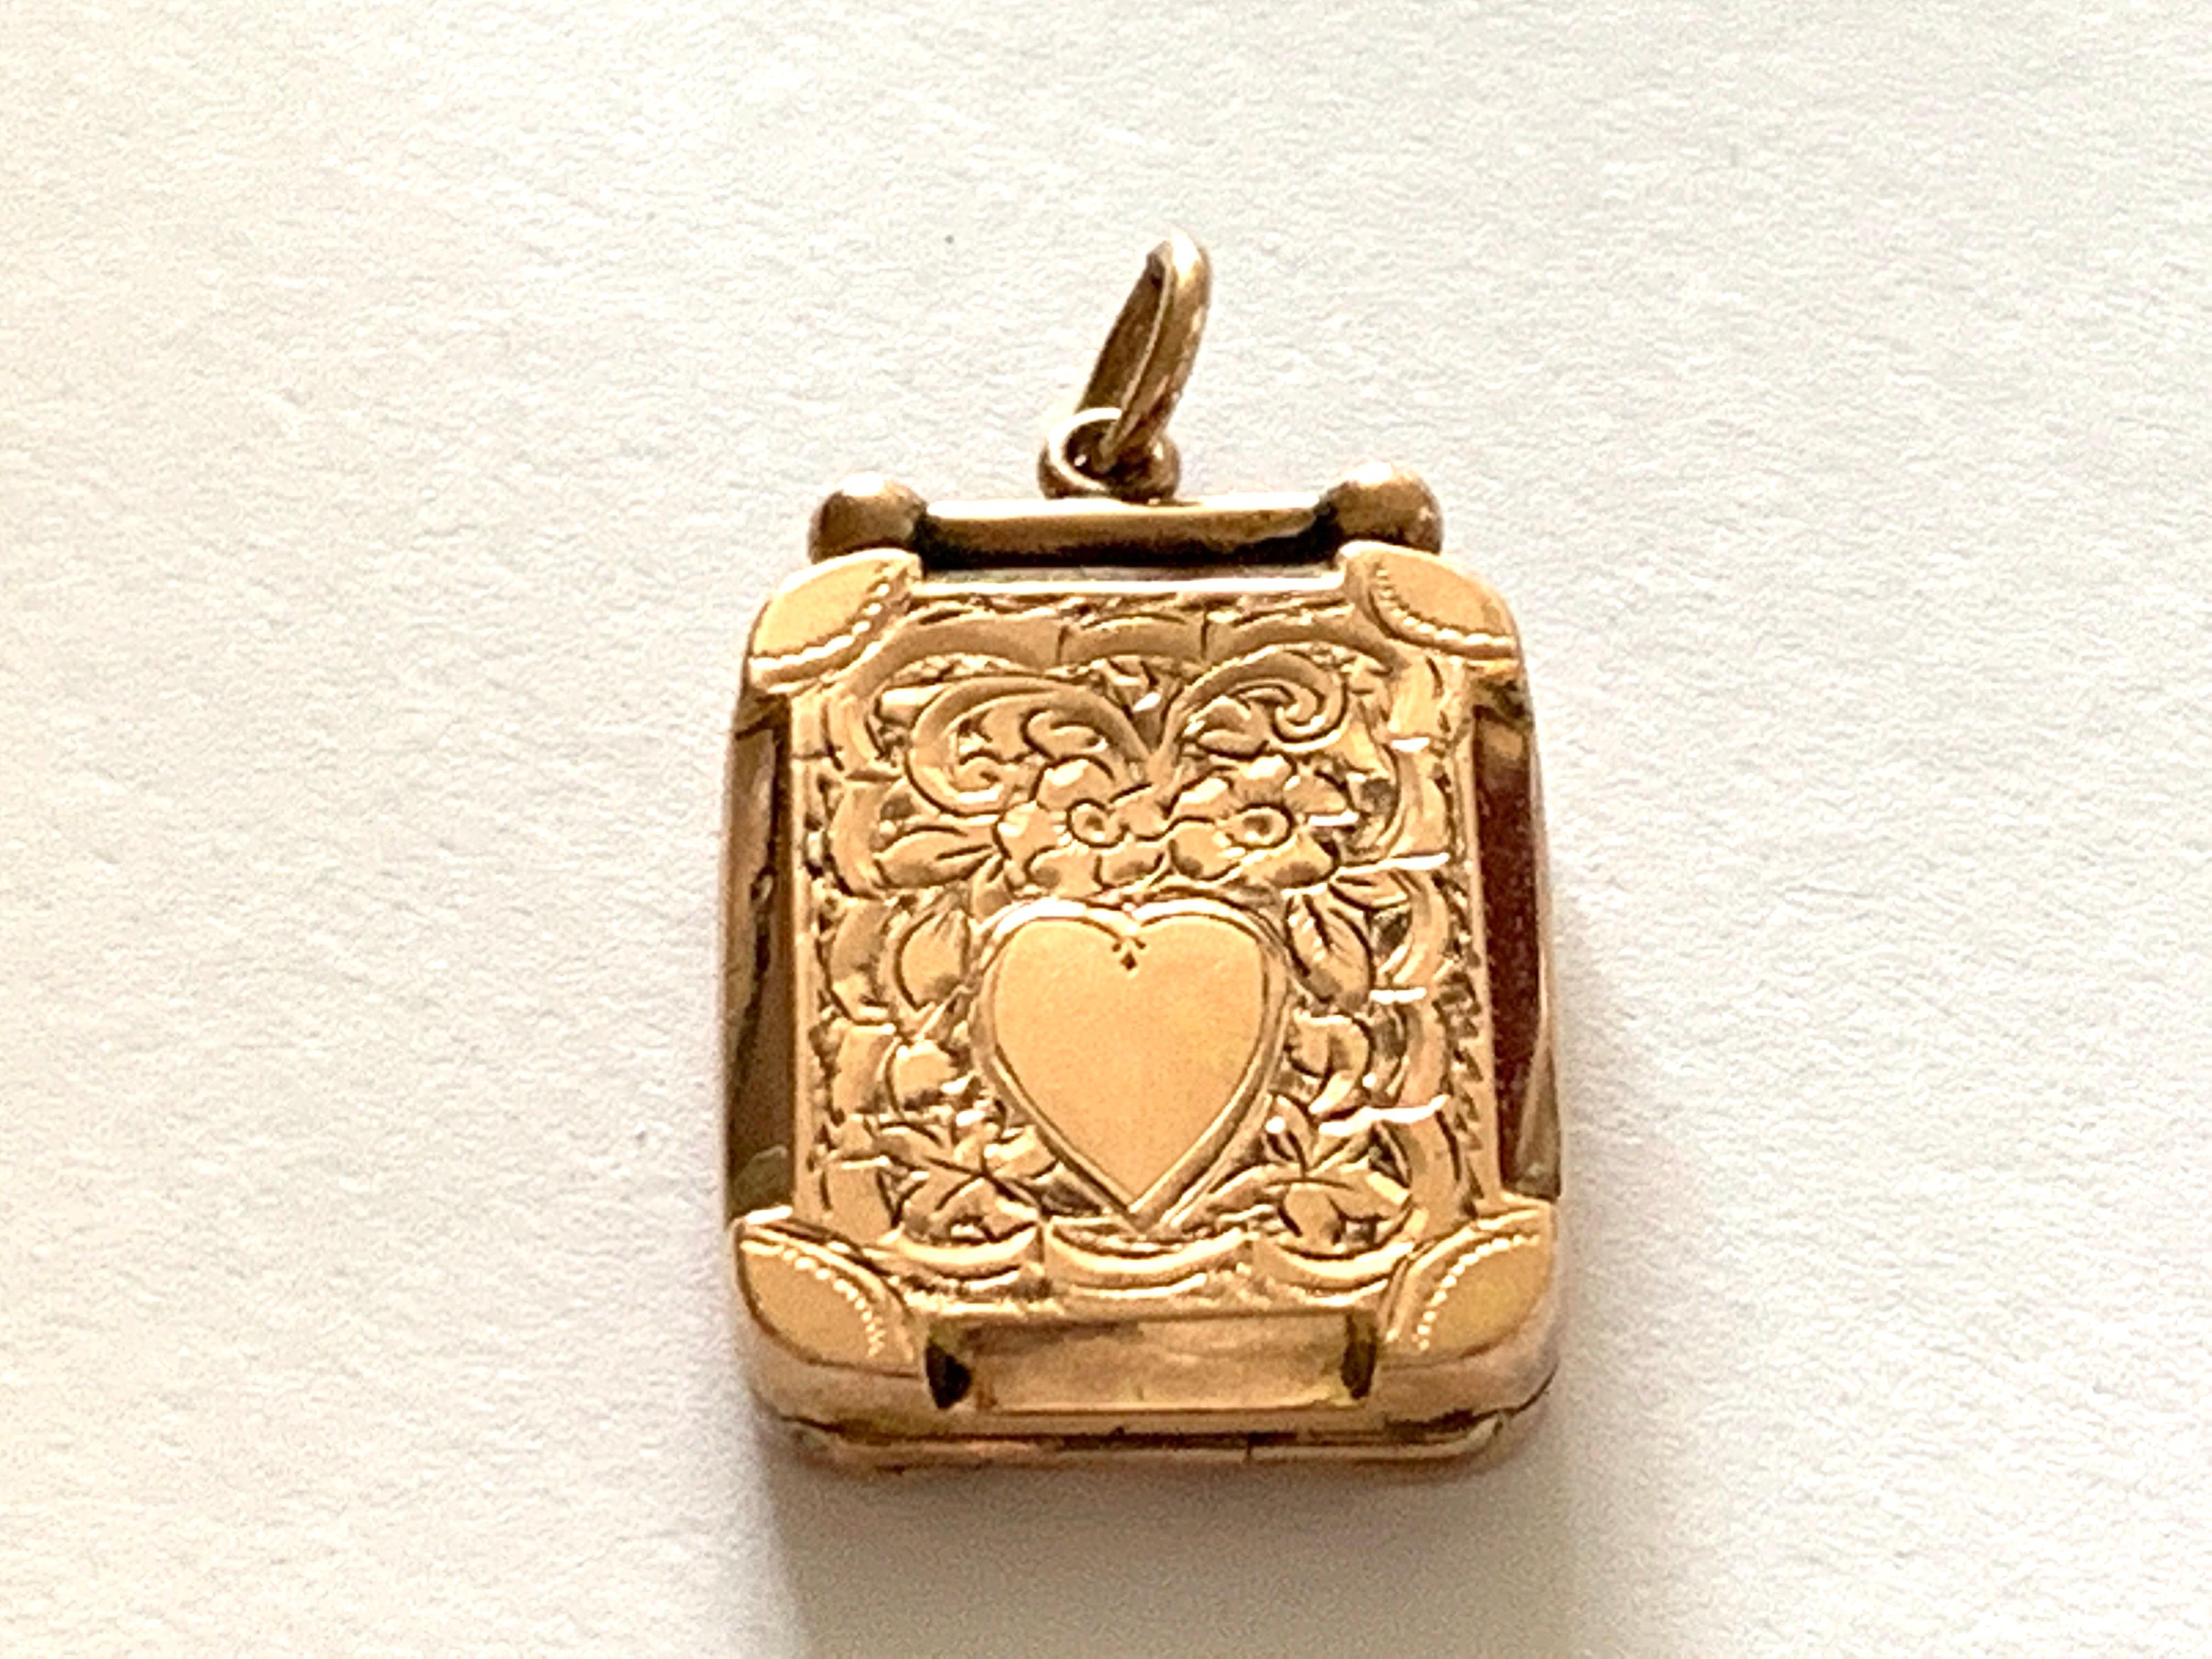 9ct 375 Gold Antique Locket

With heavily engraved decoration of foliage 
and a central blank love heart for an inscription

Fully Hallmarked on reverse 
9 375 with Birmingham assay office anchor stamp 
and dated letter 